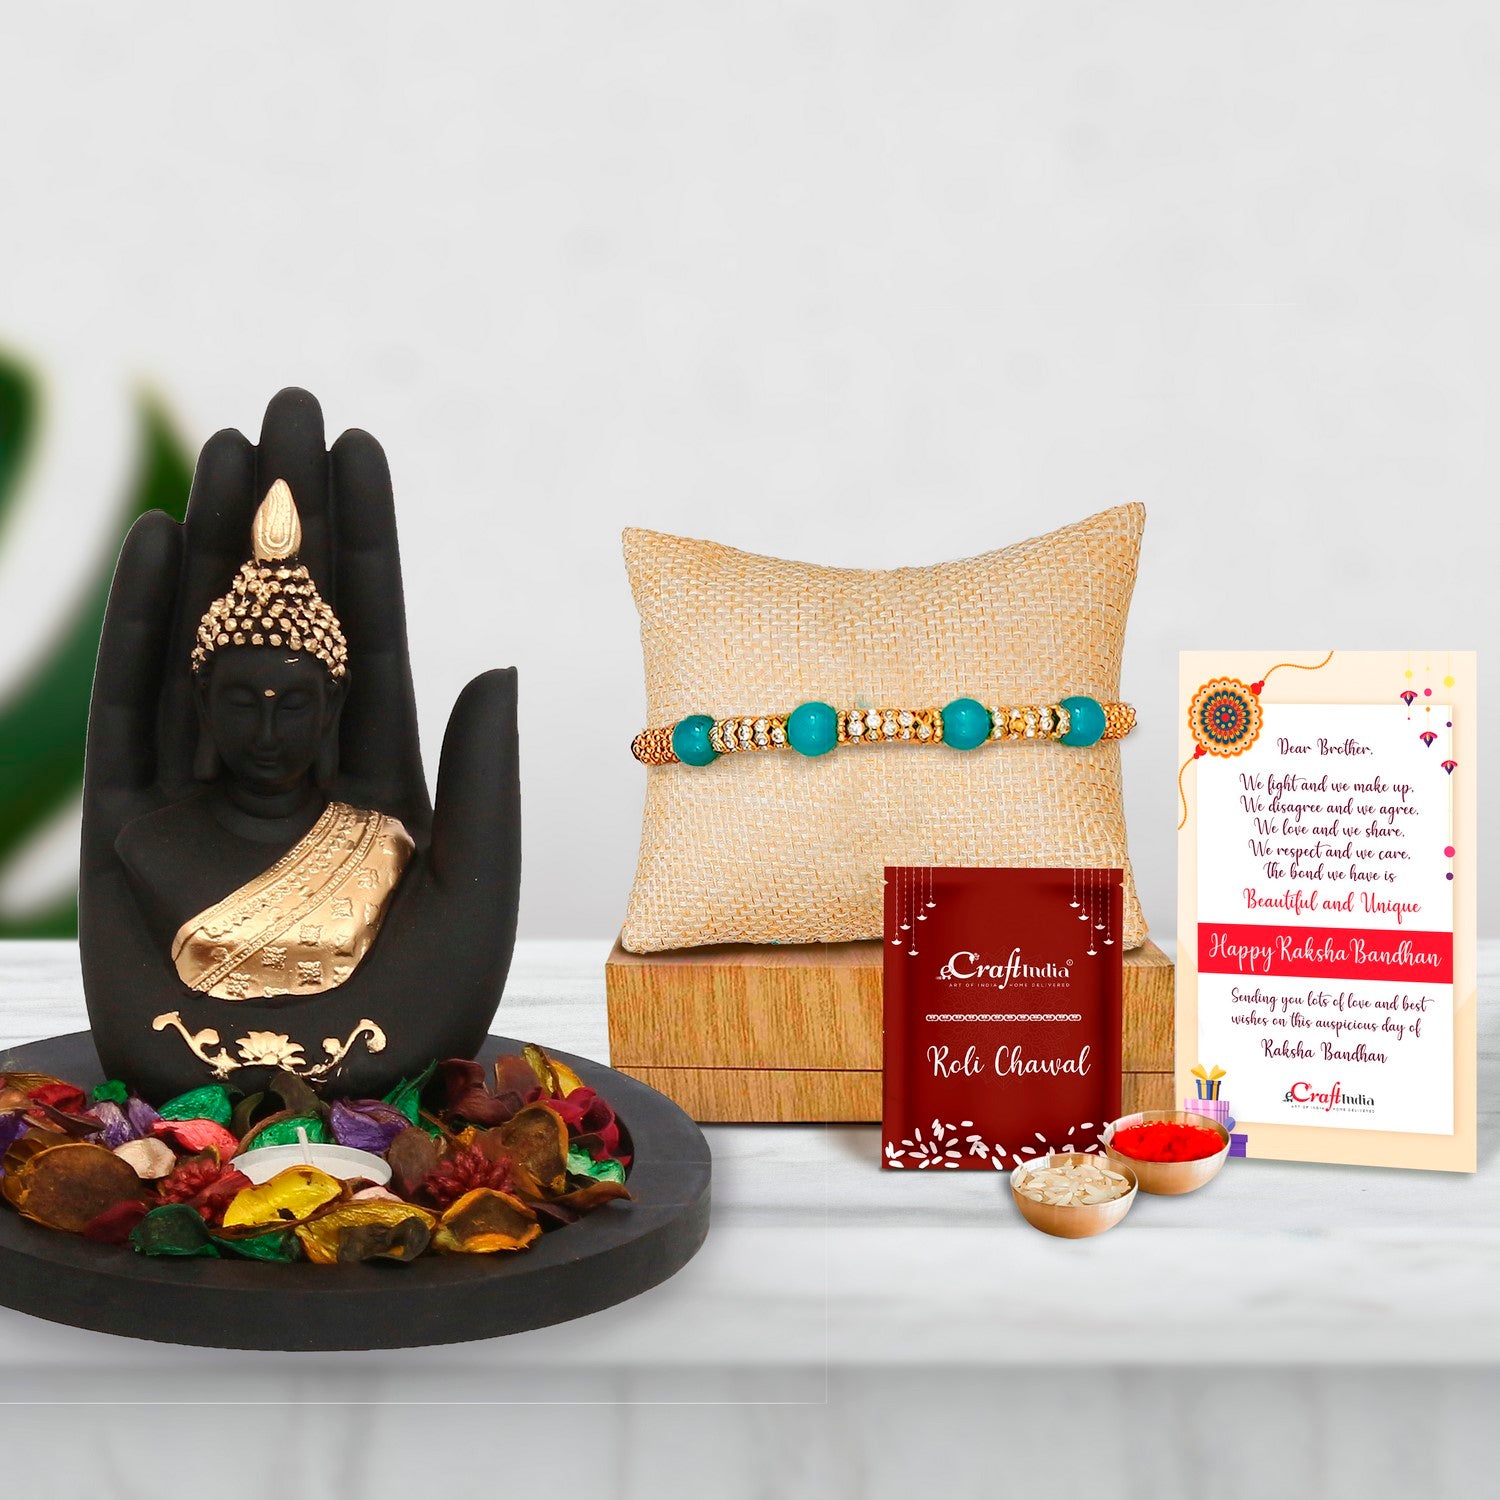 Designer Pearl Rakhi with Golden Handcrafted Palm Buddha Decorative Showpiece with Wooden Base, Fragranced Petals and Tealight and Roli Chawal Pack, Best Wishes Greeting Card